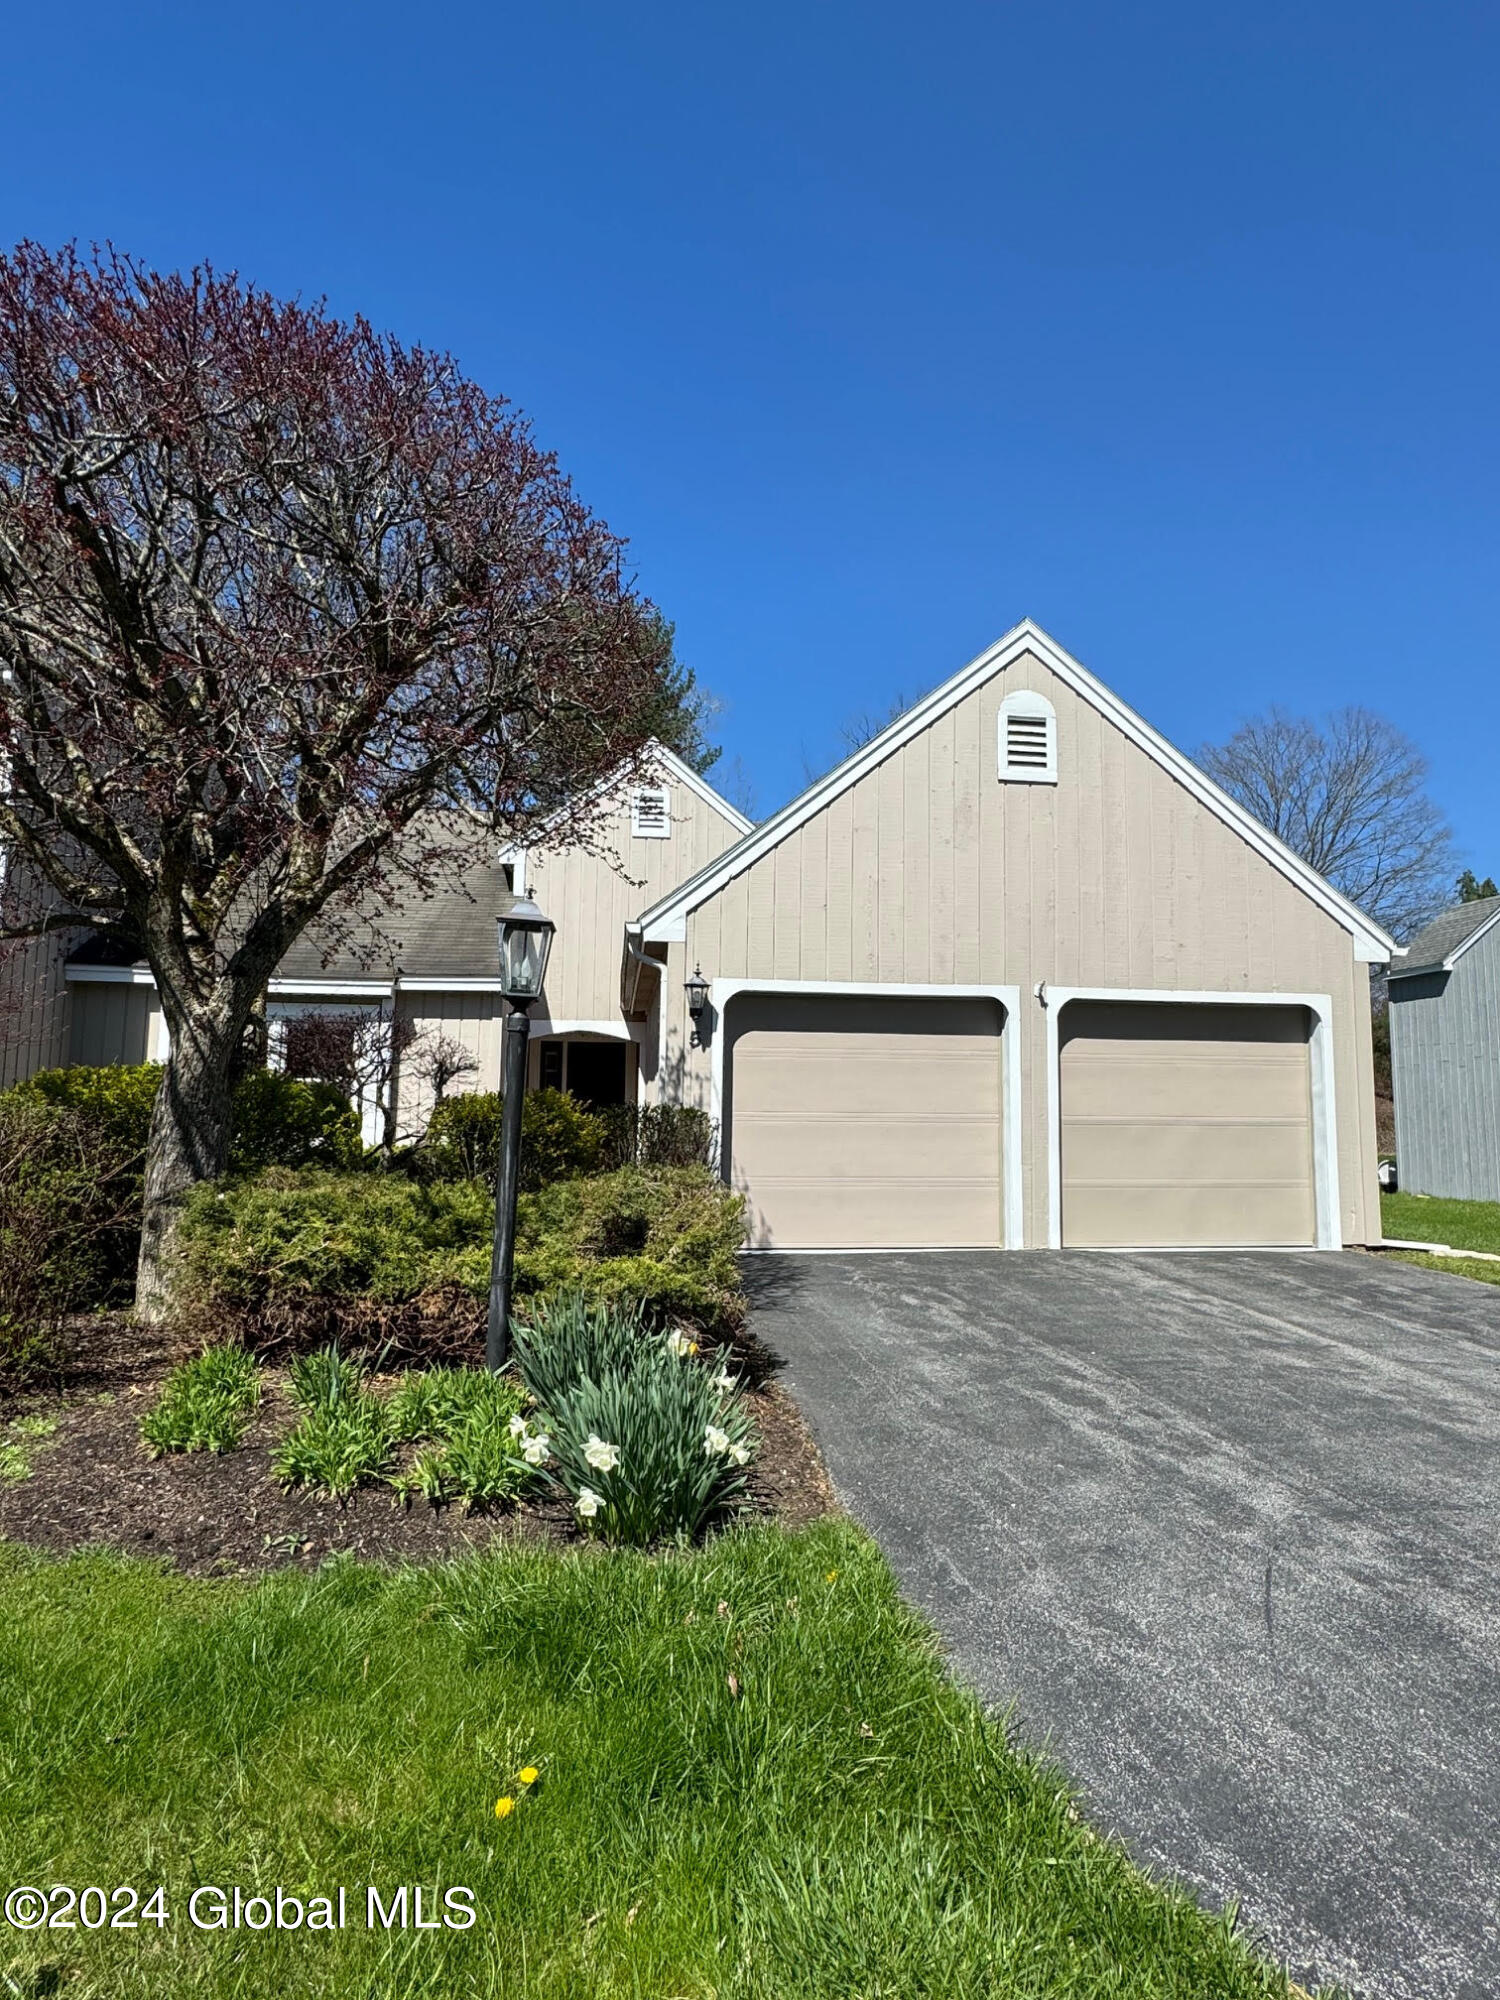 View Voorheesville, NY 12186 townhome